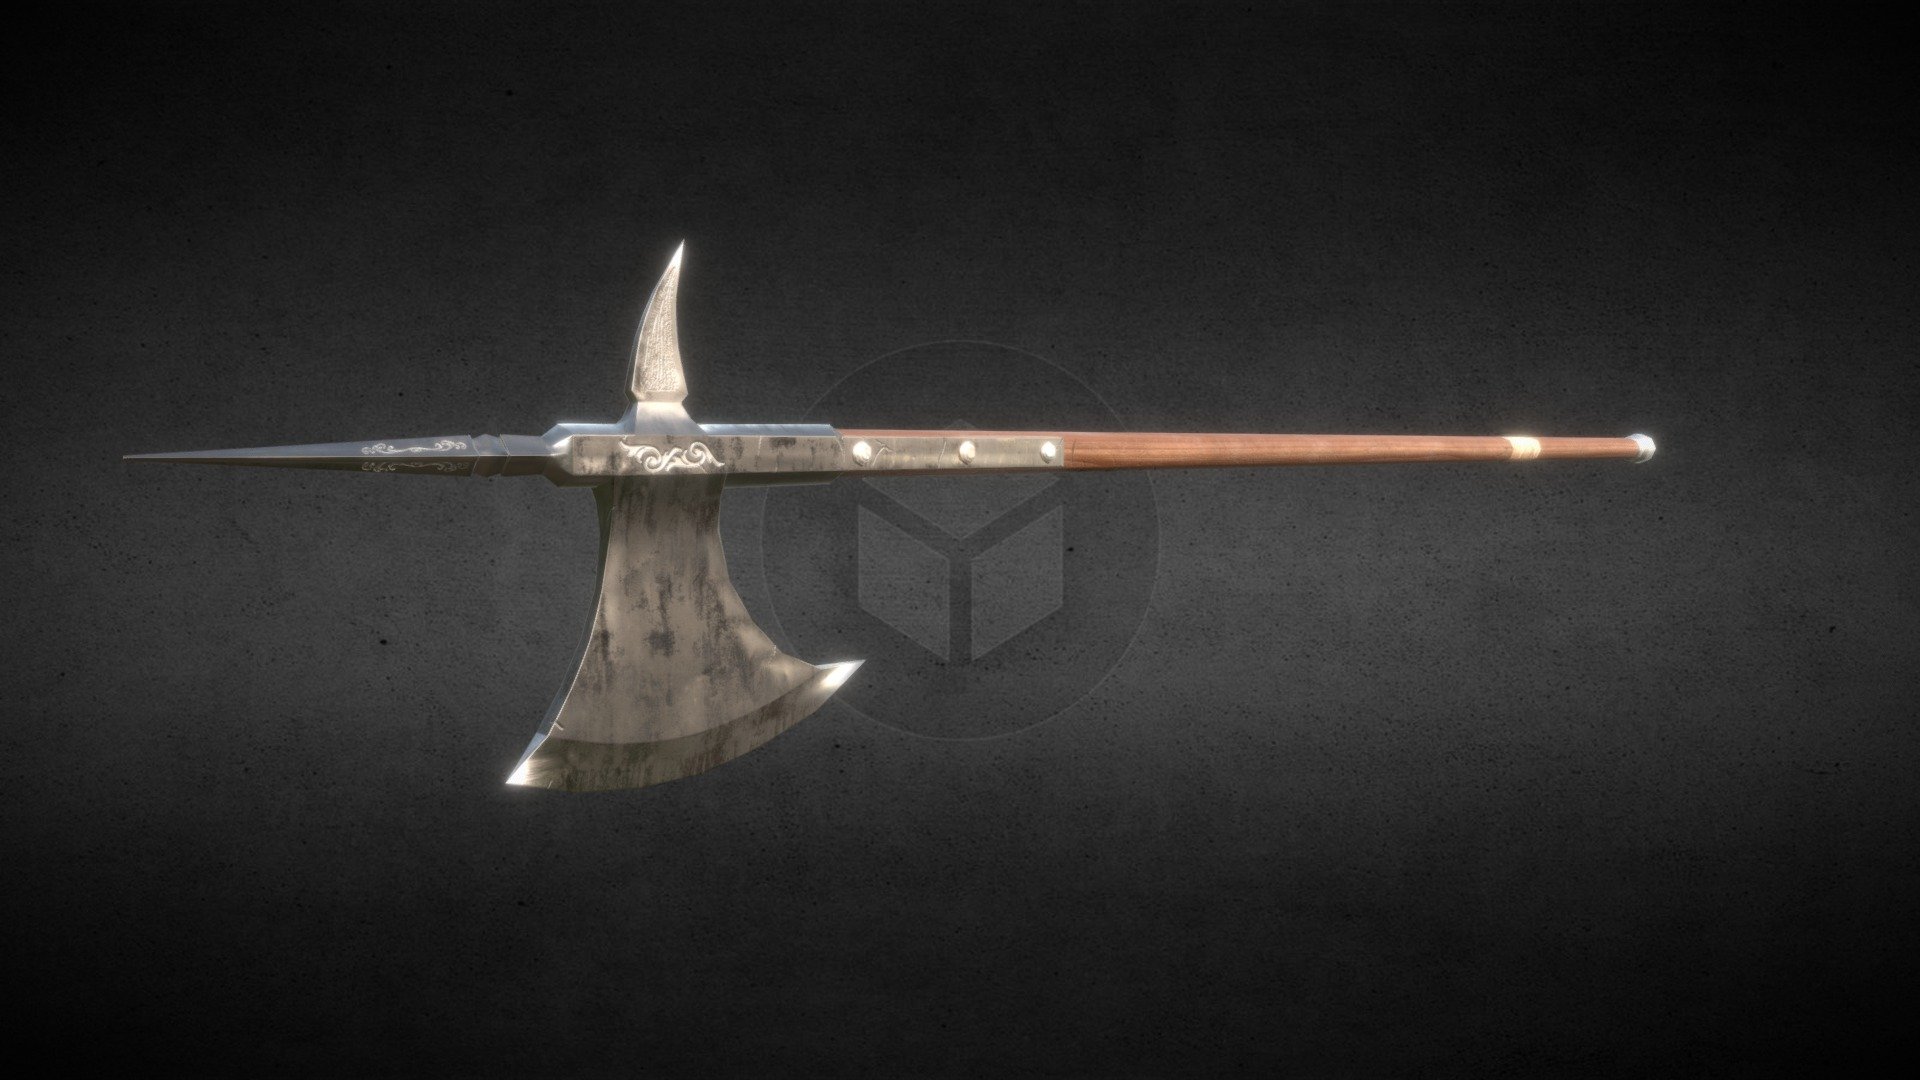 Another quick model of a medieval weapon, made as a exercise. Hope you like it a little 3d model